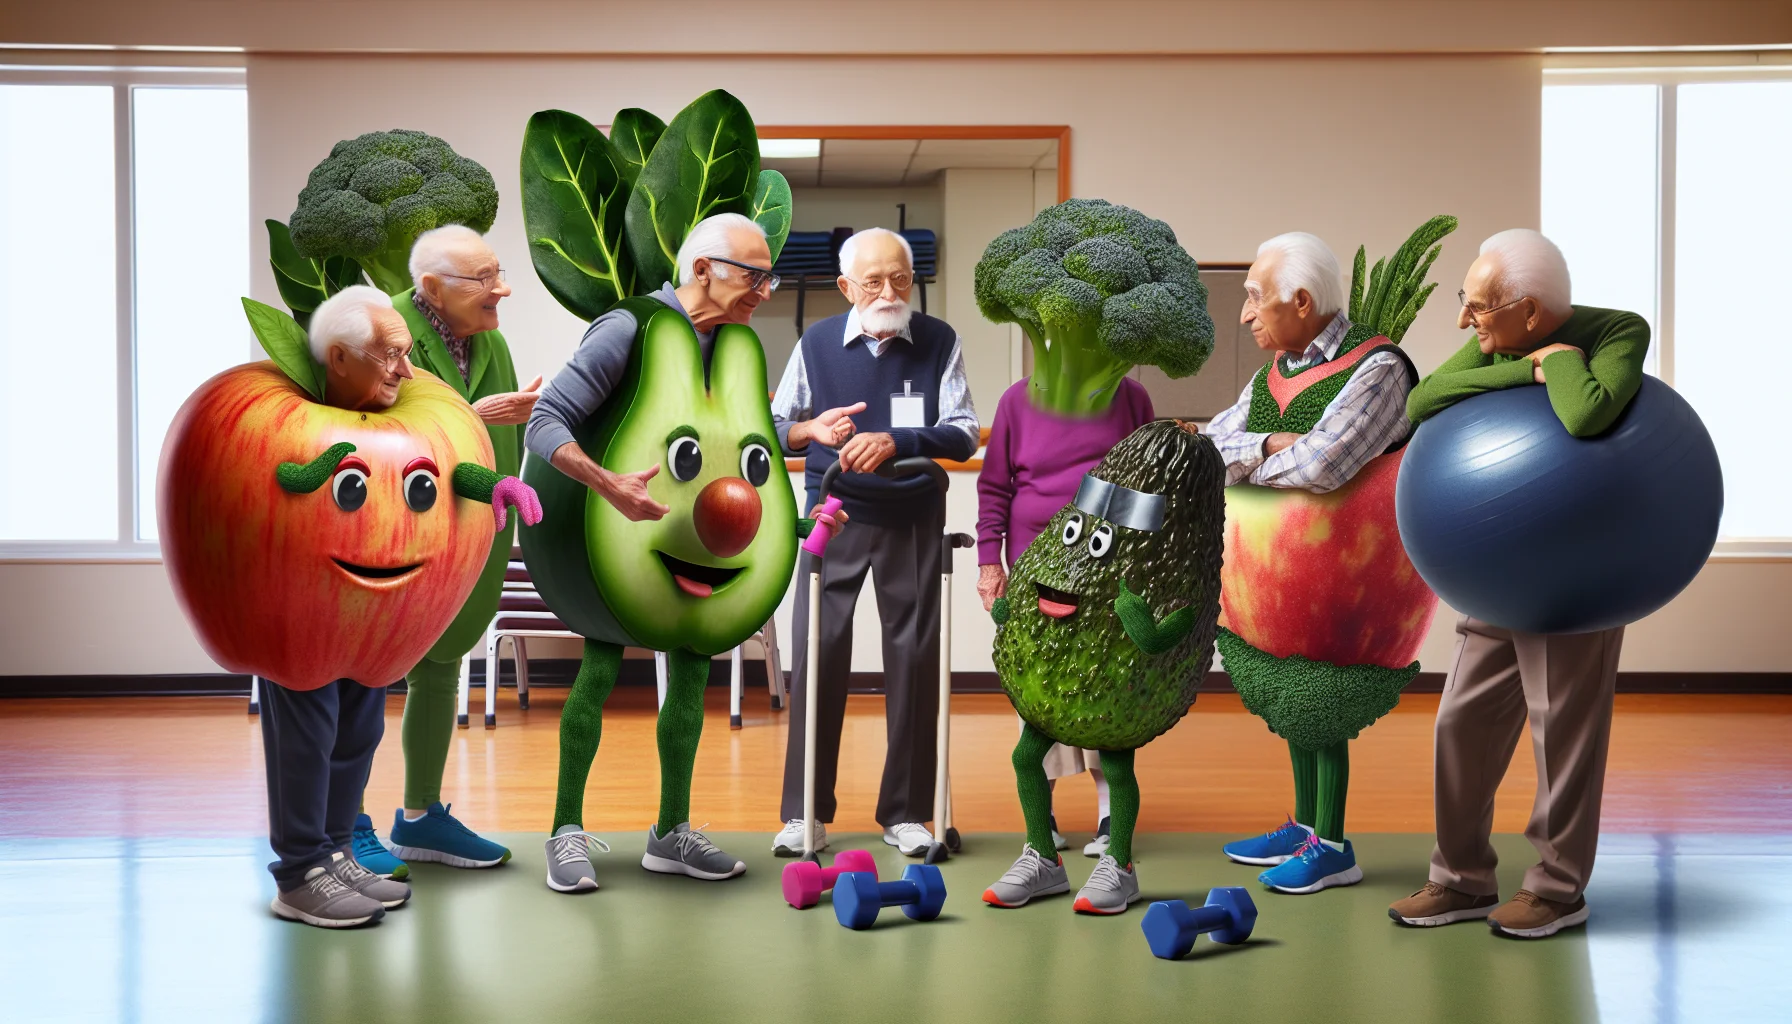 Create an amusing and lifelike portrayal of high fiber, low carbohydrate foods ideal for individuals with diabetes. The backdrop for this image is a typical day at a seniors exercise class. Fantastically anthropomorphized fruits and vegetables like broccoli, spinach, apples, and avocados are seen 'coaching' the seniors, encouraging them to make healthier dietary choices. The seniors, displaying a wide range of emotions from surprise to intrigue, engage in lighthearted banter and humorous interactions with these characterised foods. The image perfectly highlights the connection between nutrition, age, and wellness in a very humorous manner.